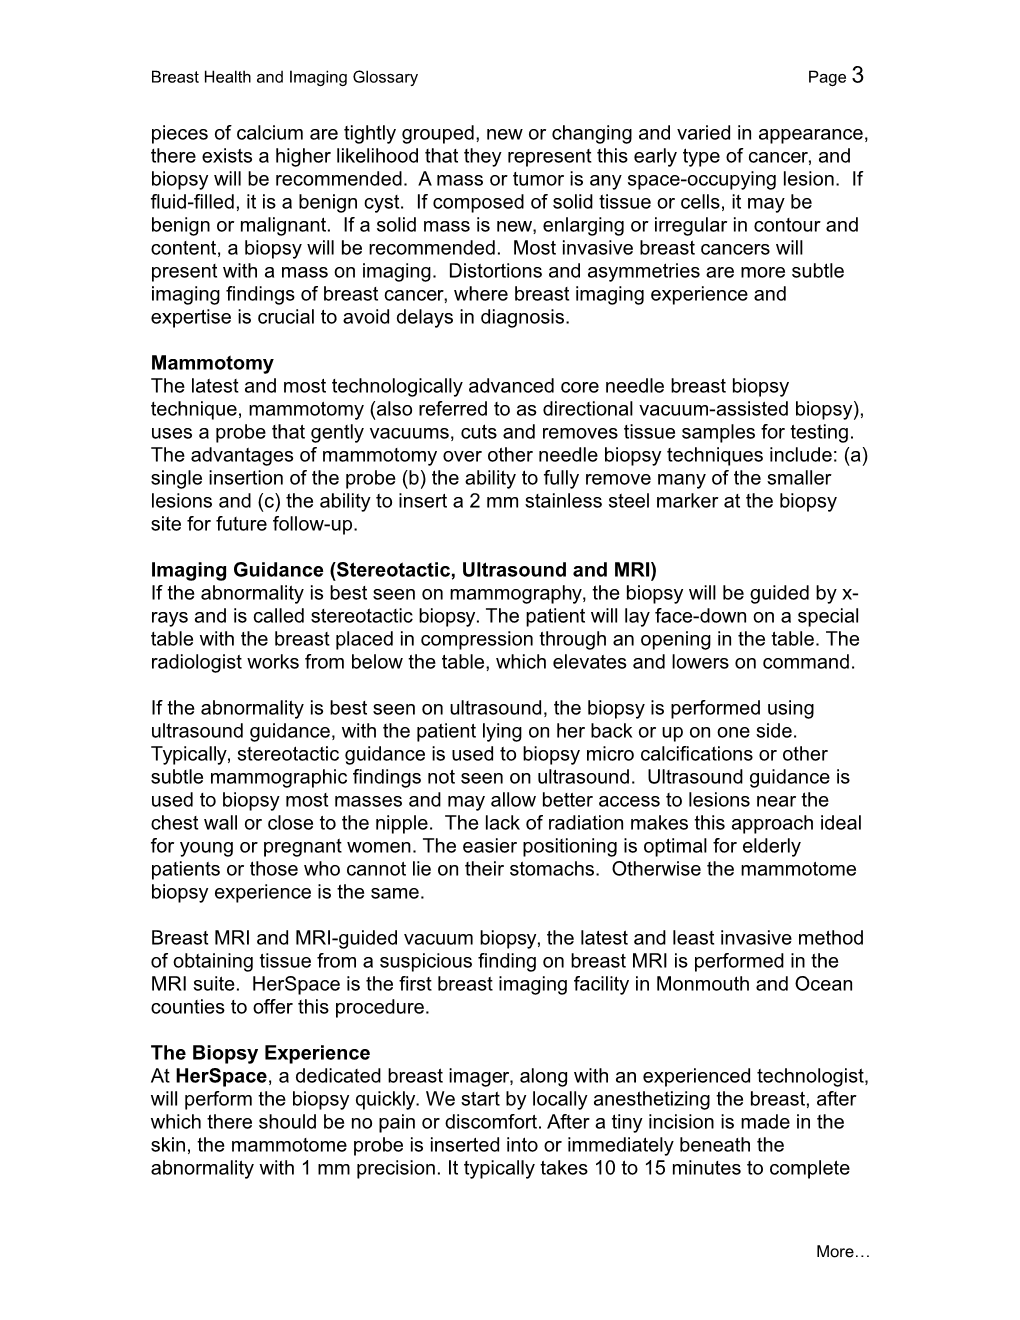 Breast Health and Imaging Glossarypage 1